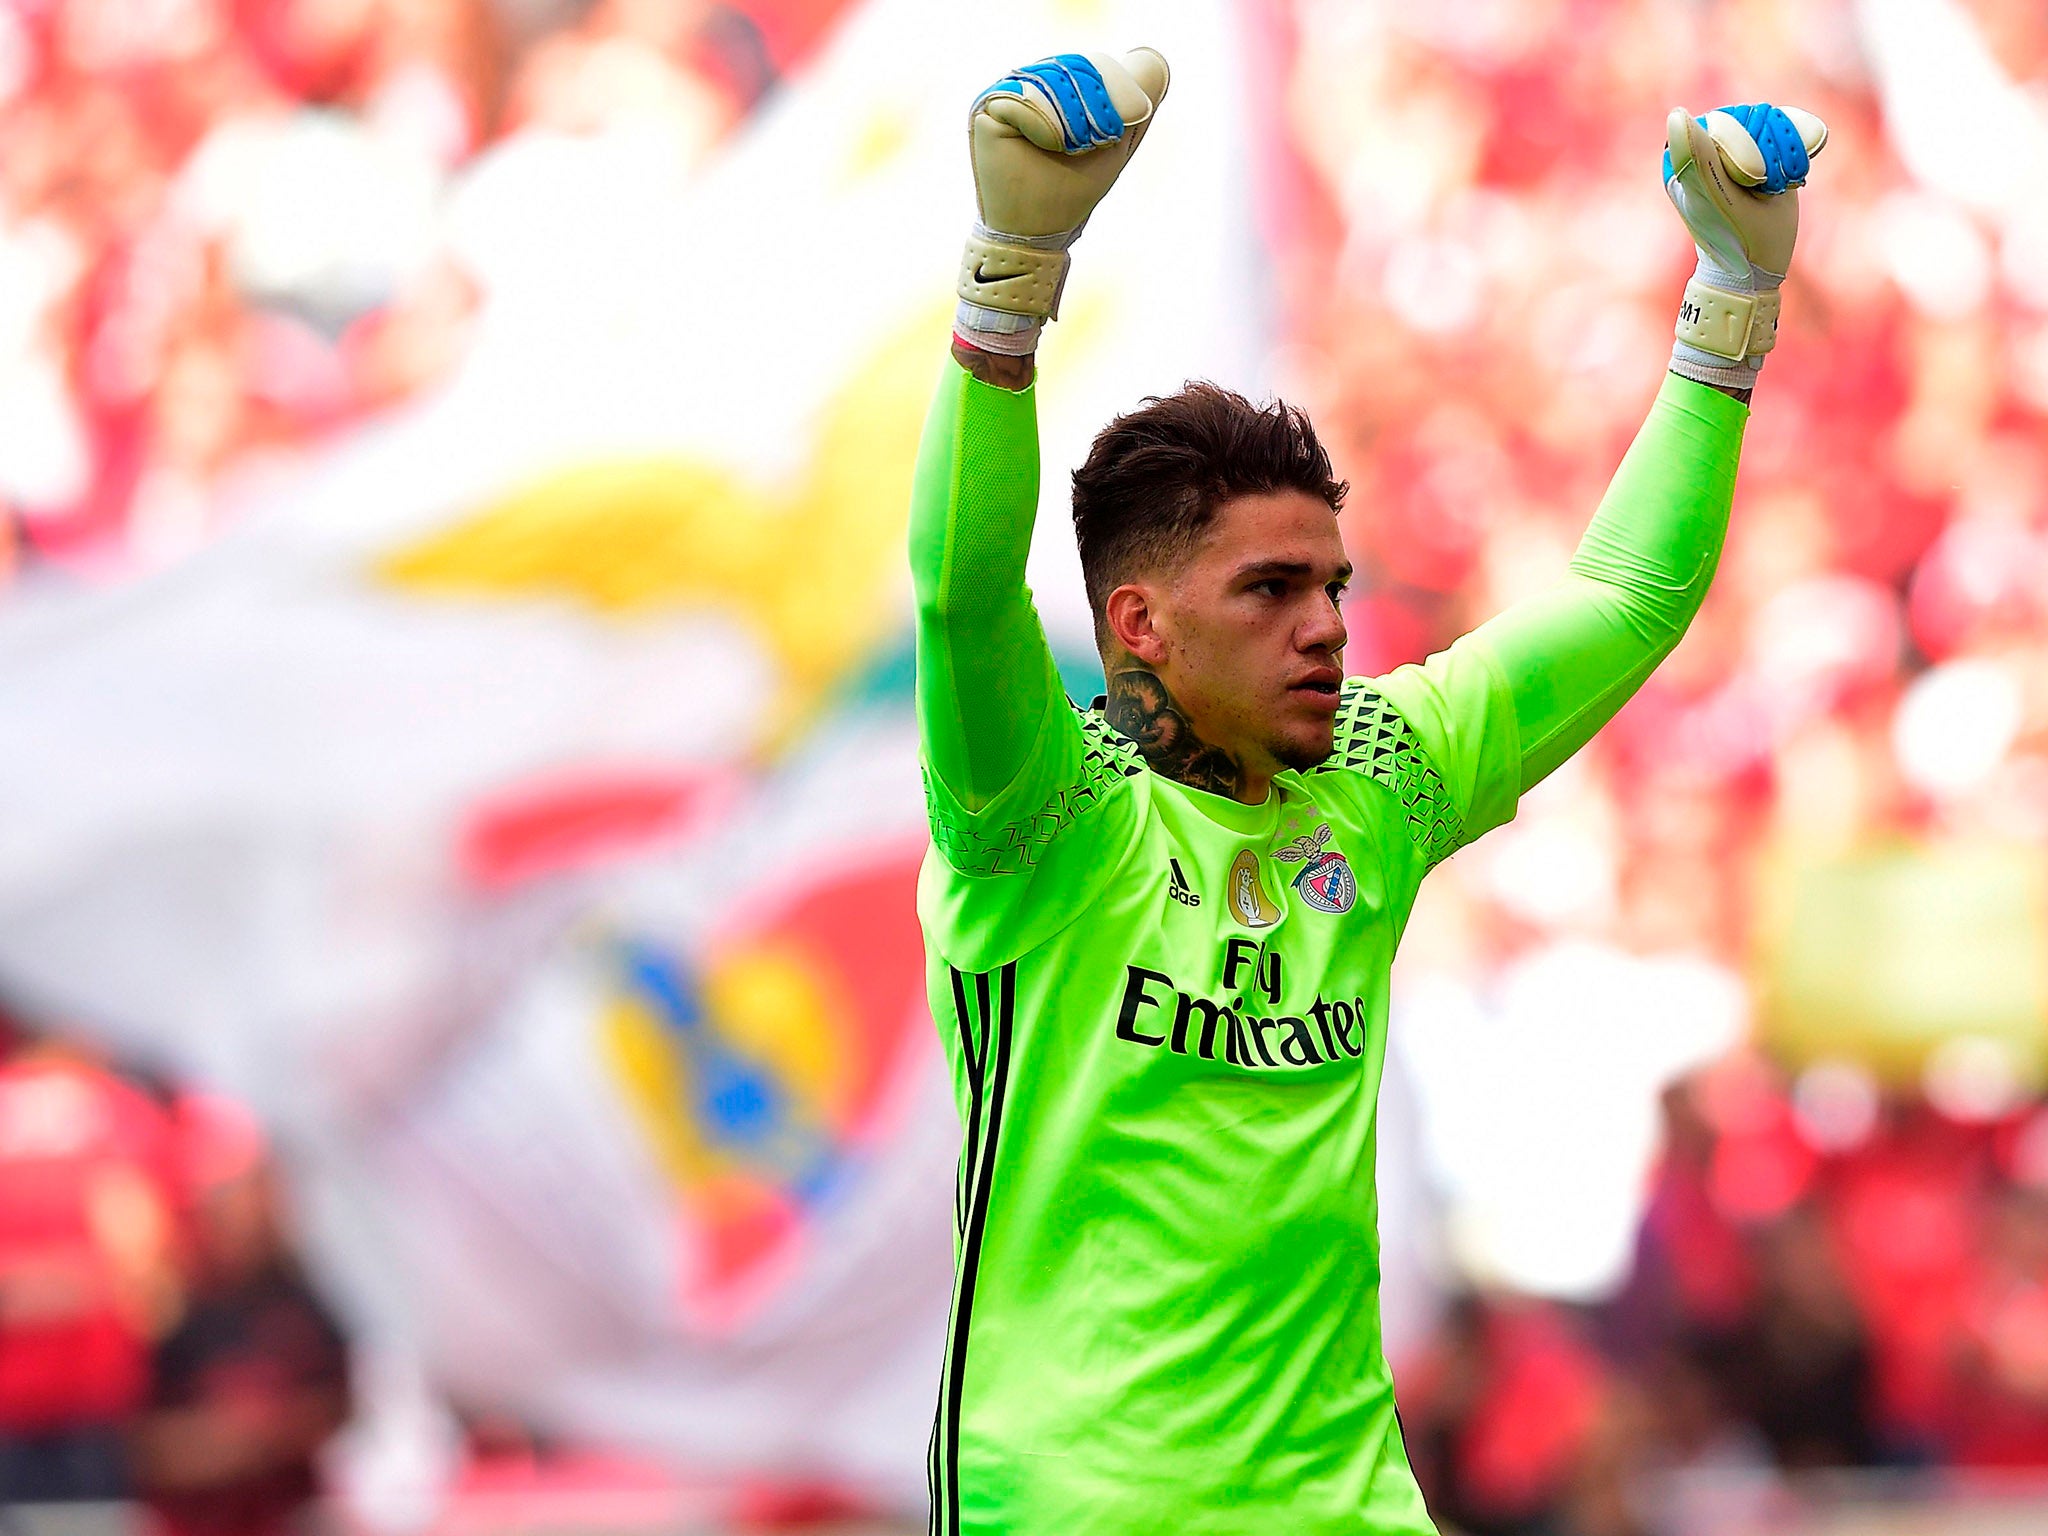 Signing Ederson would bring City's summer spending to £78m already